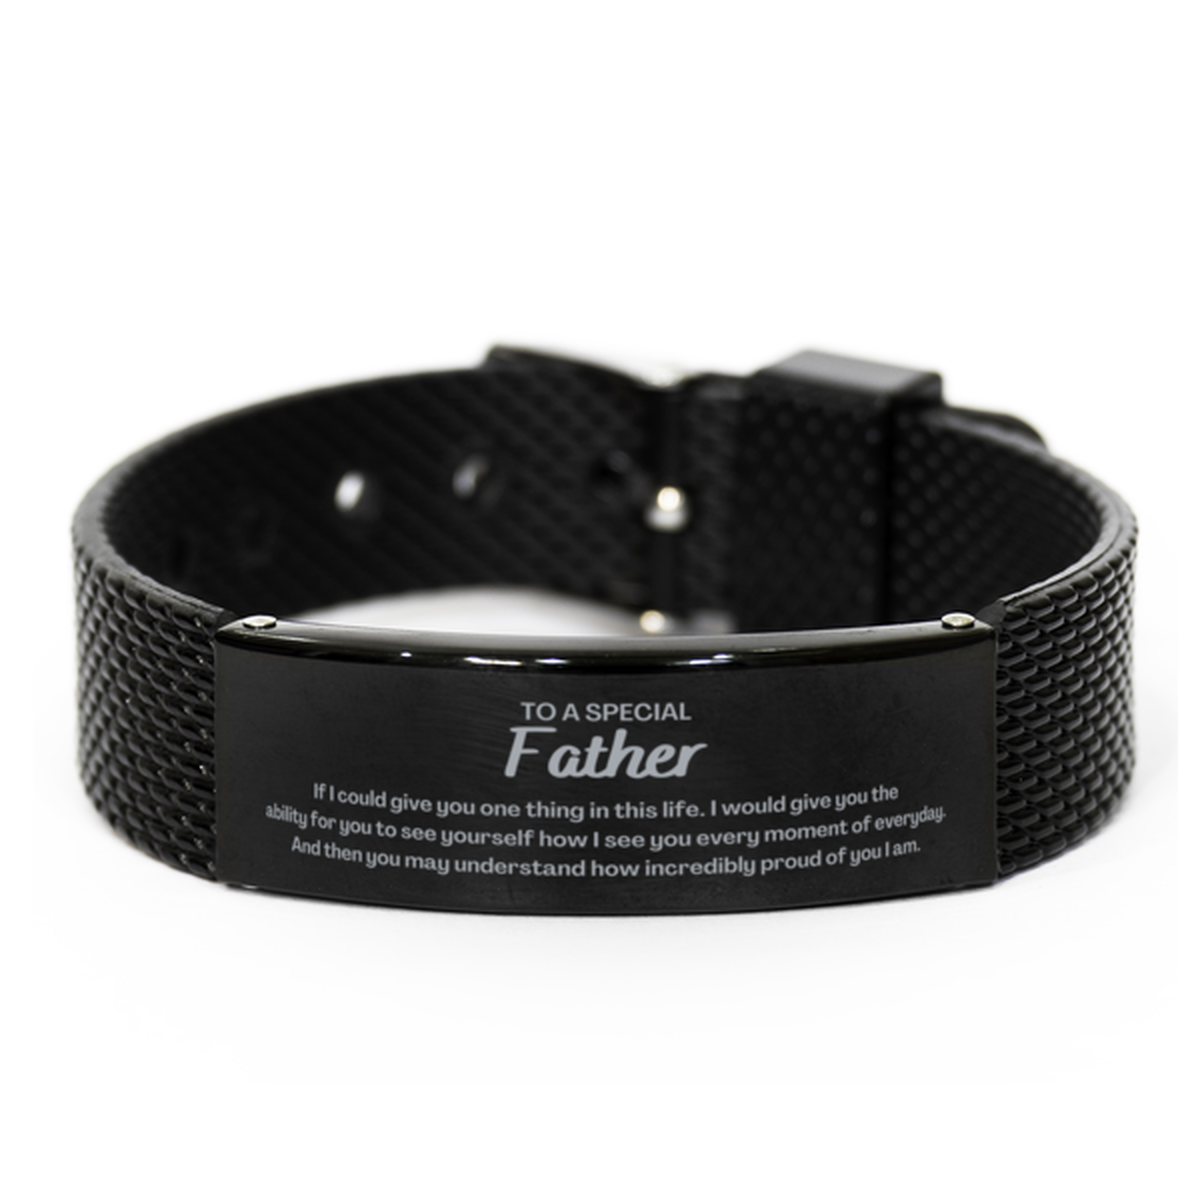 To My Father Black Shark Mesh Bracelet, Gifts For Father Engraved, Inspirational Gifts for Christmas Birthday, Epic Gifts for Father To A Special Father how incredibly proud of you I am